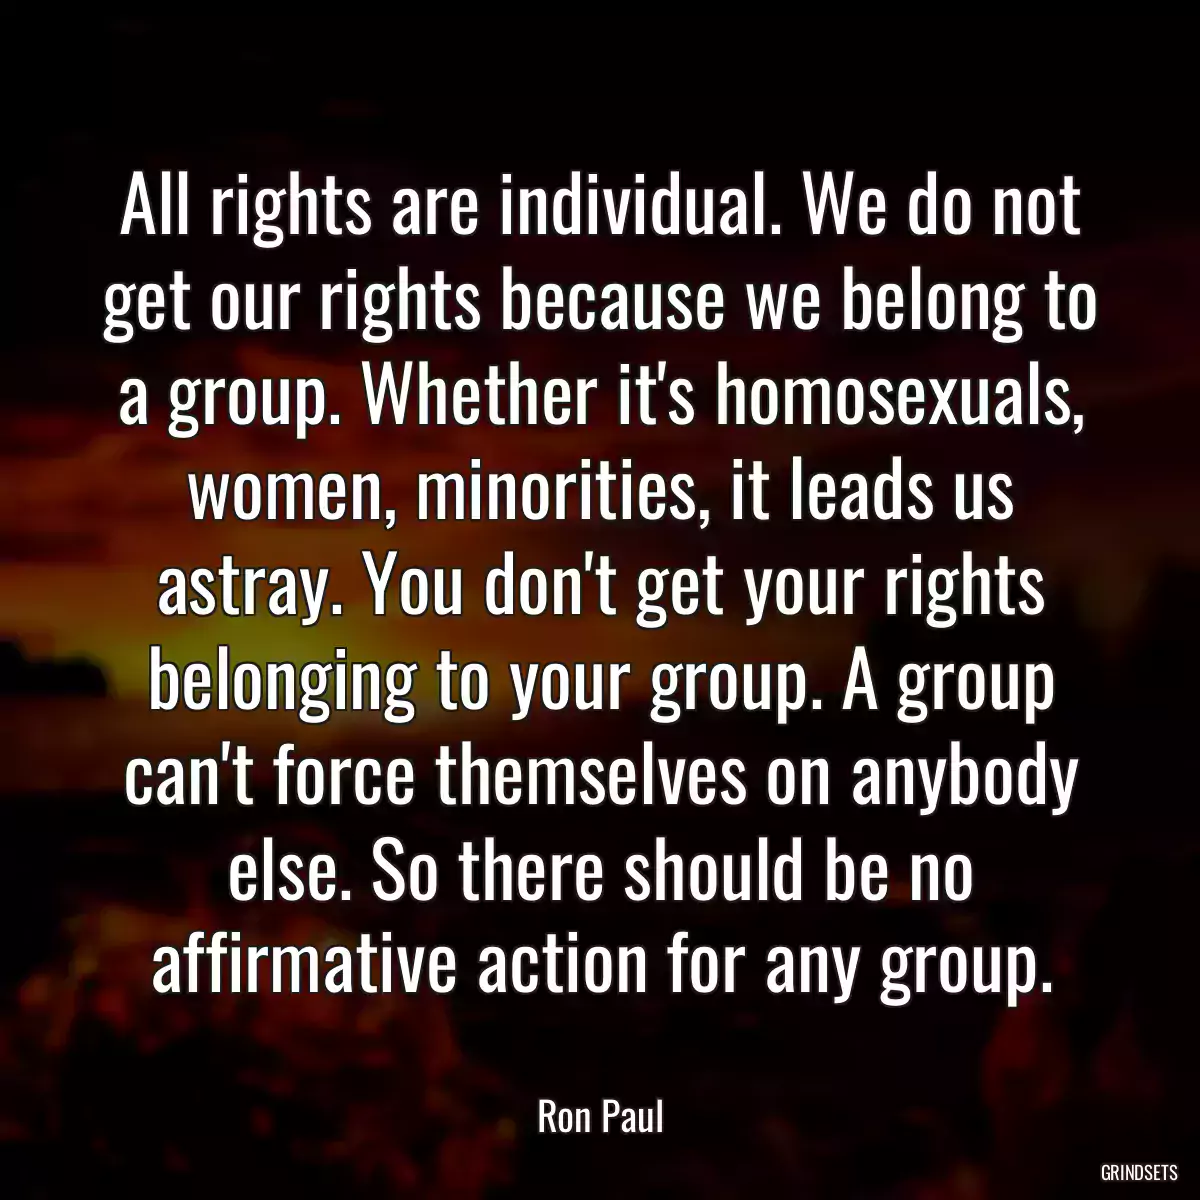 All rights are individual. We do not get our rights because we belong to a group. Whether it\'s homosexuals, women, minorities, it leads us astray. You don\'t get your rights belonging to your group. A group can\'t force themselves on anybody else. So there should be no affirmative action for any group.